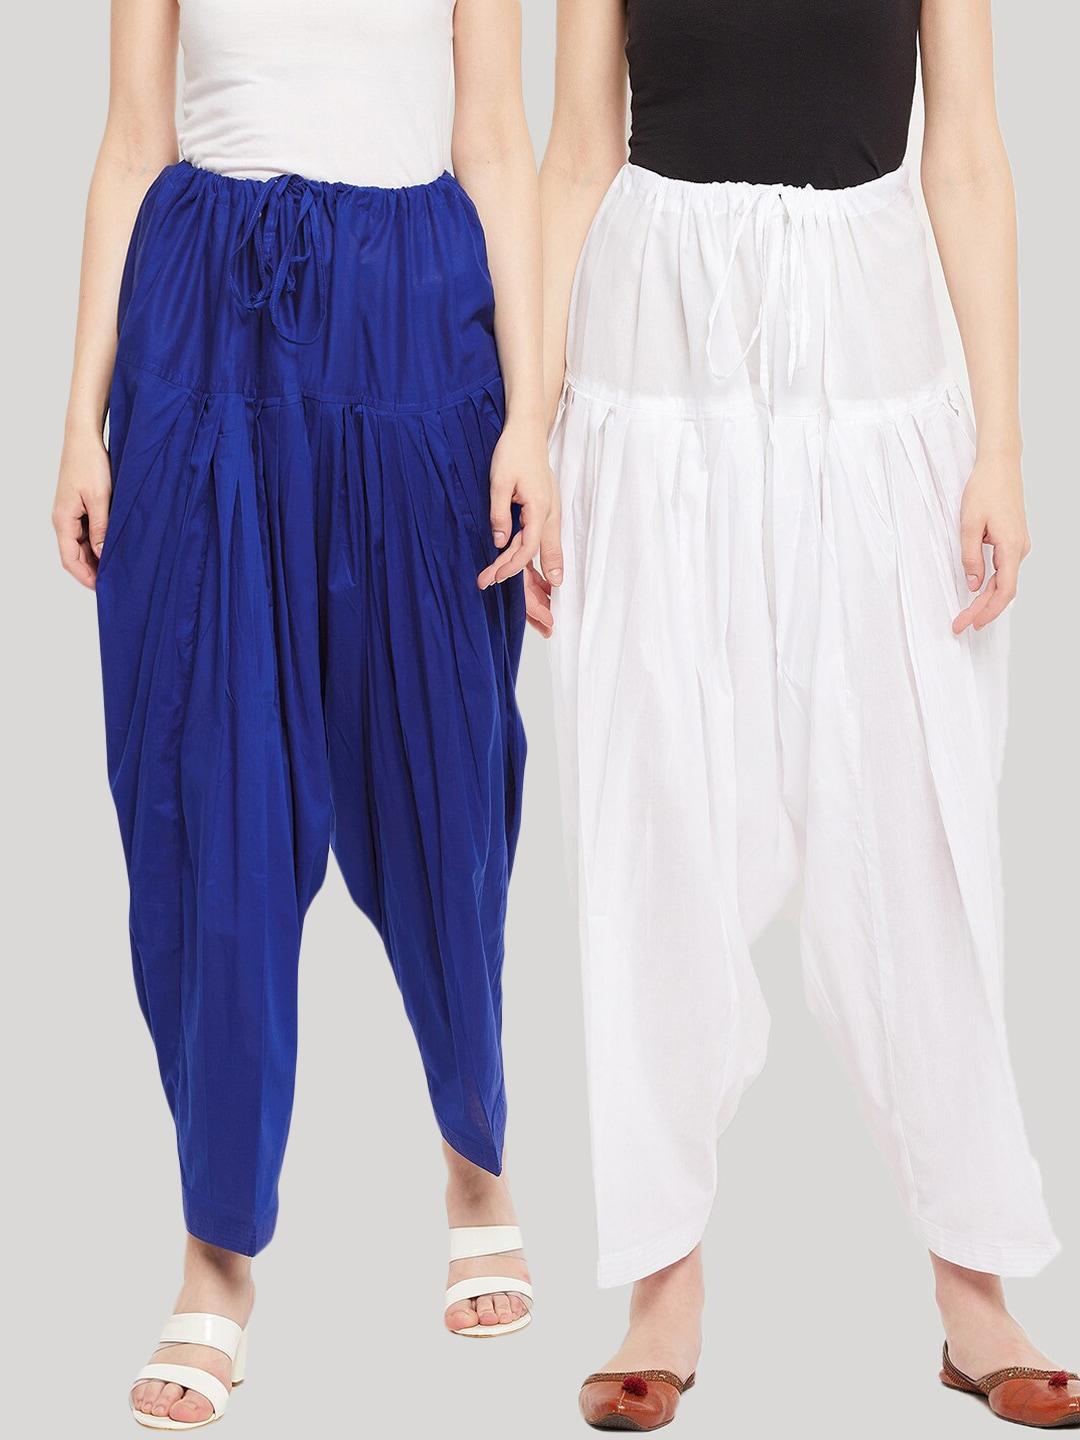 clora creation women navy blue & white pack of 2 solid pure cotton loose fit salwar